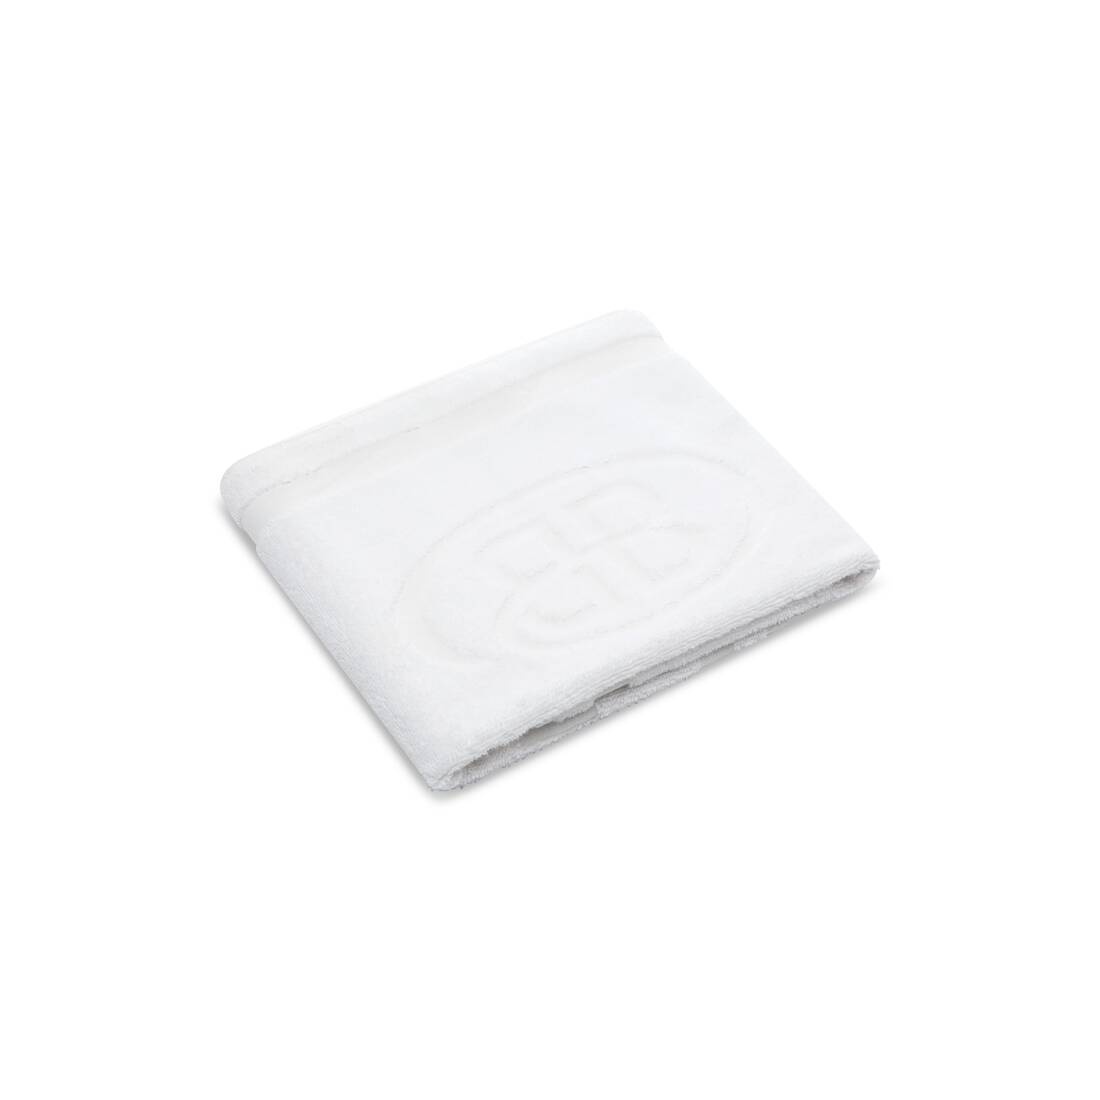 Hand Towel in White - 2